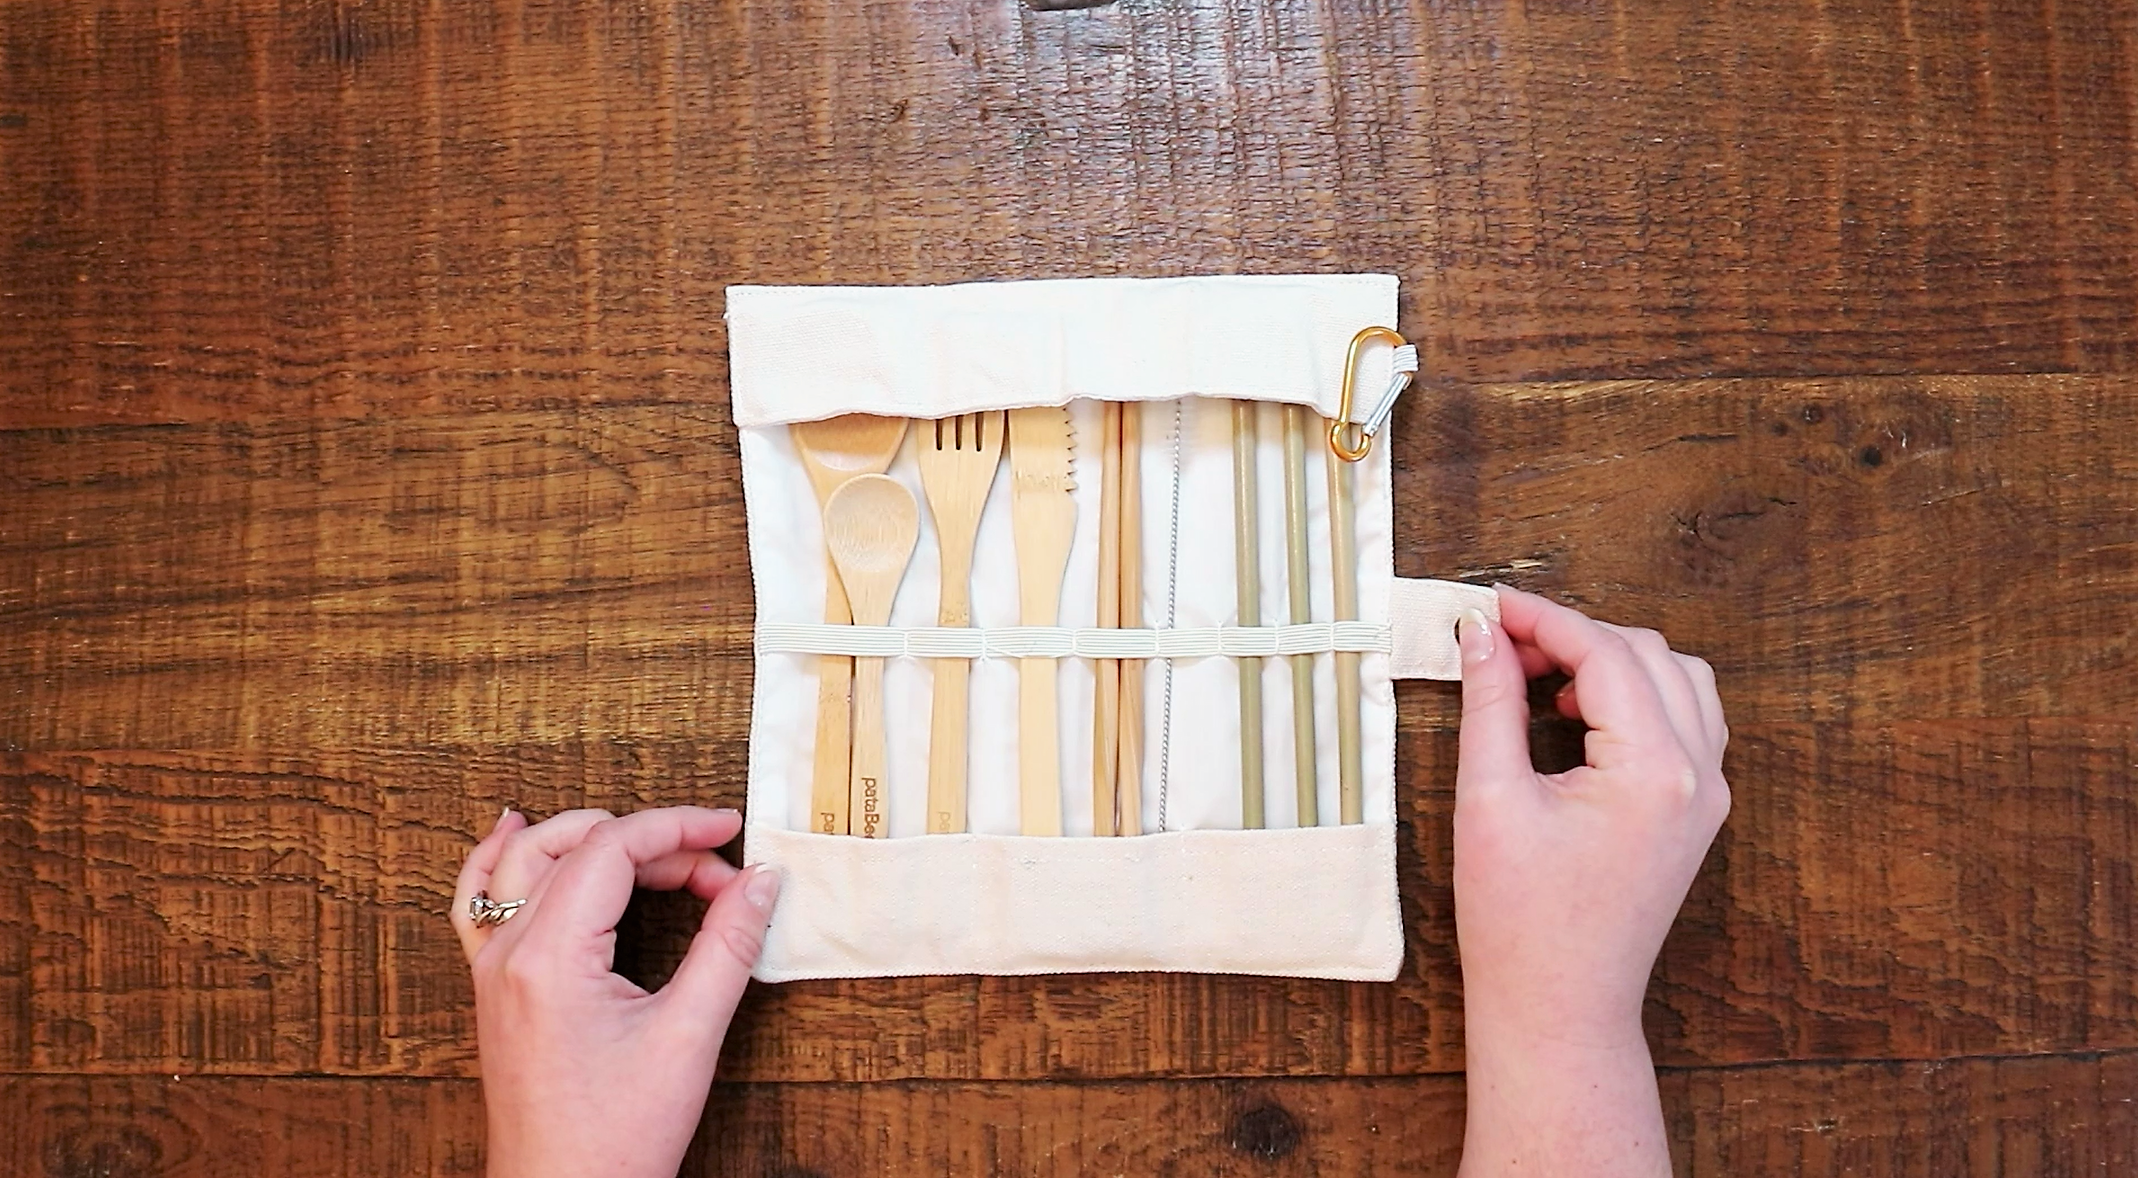 ZERO WASTE CUTLERY KIT GIVEAWAY ON INSTAGRAM & YOUTUBE! Cultivator Kitchen #ck3kgiveaway